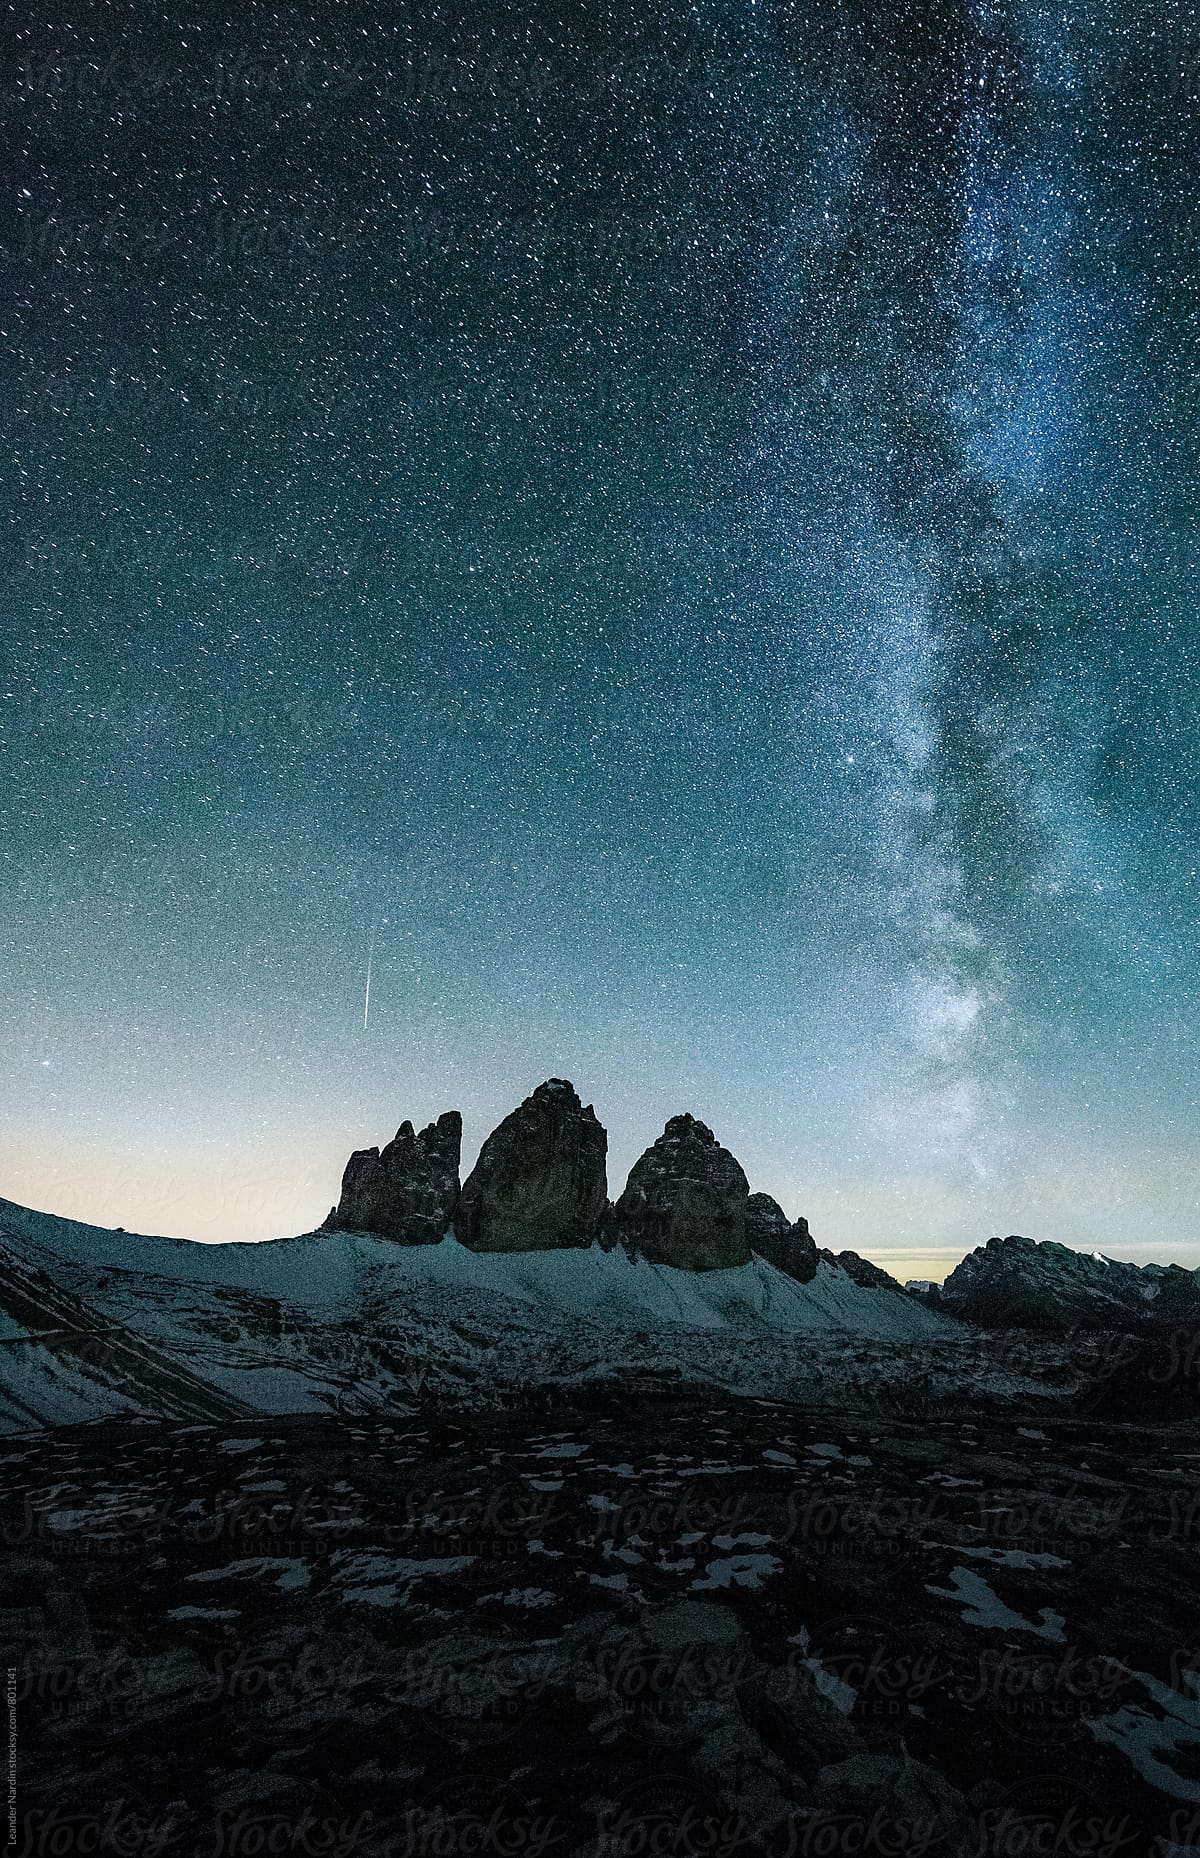 blue milky way above the famous three peaks in the italian alps in a clear night